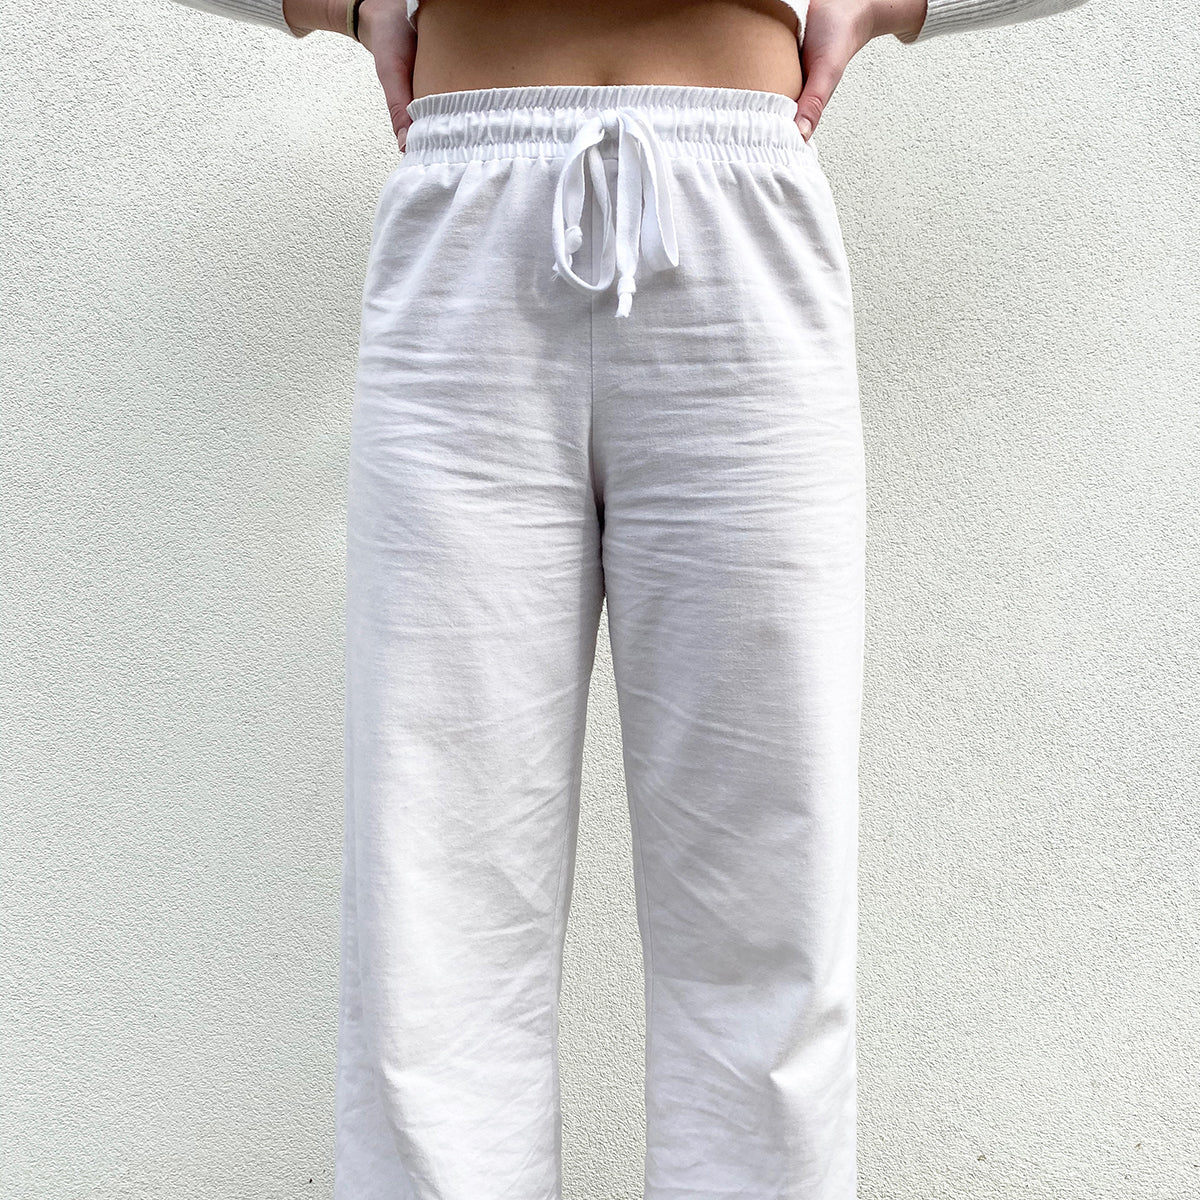 Stella Claire linen wide leg pants. Sustainably made in New Zealand.